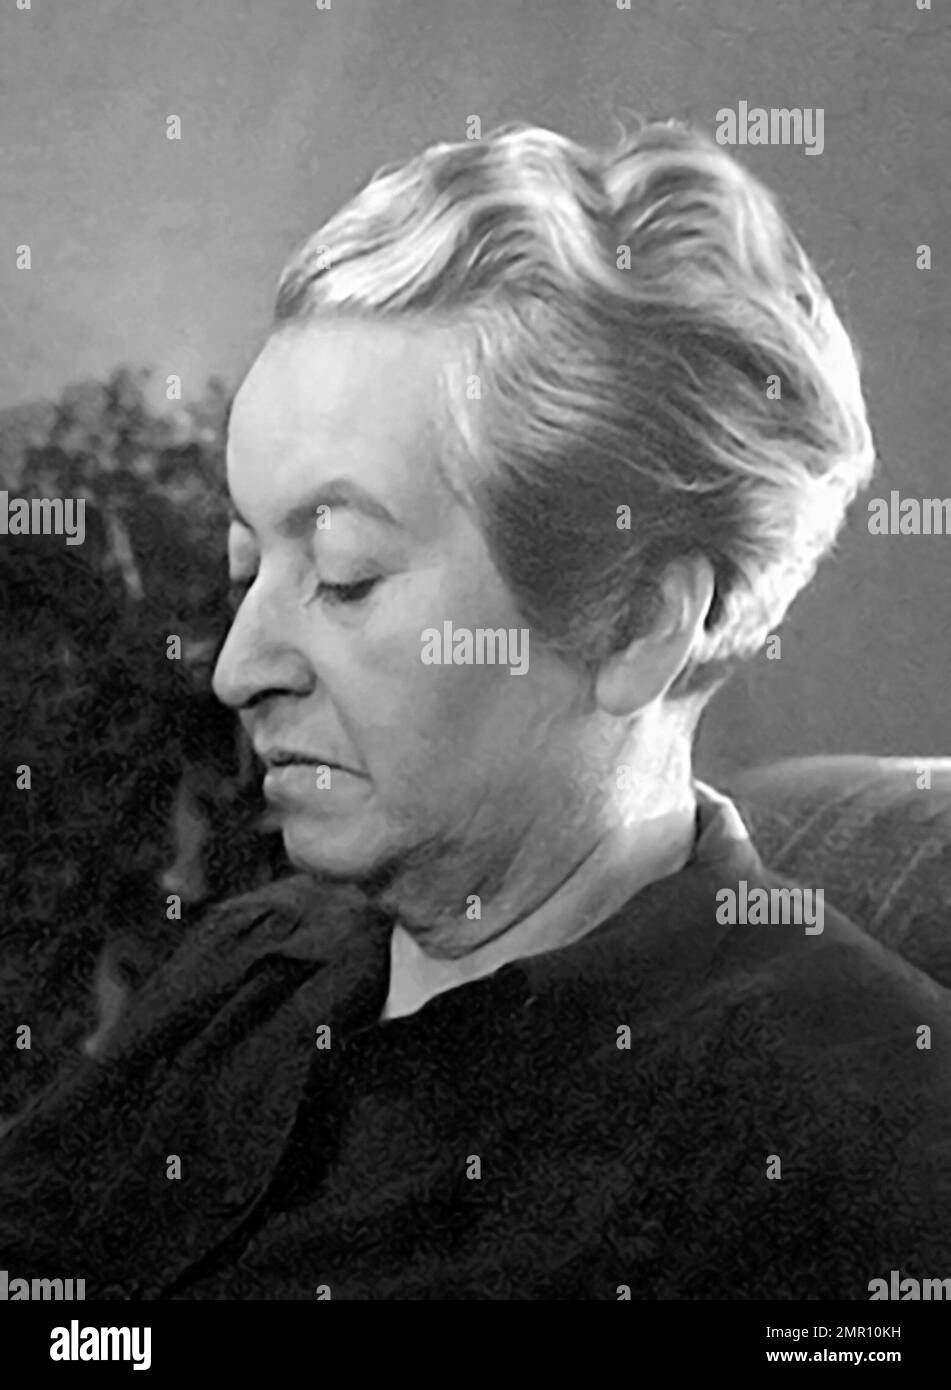 Gabriela Mistral. Portrait of the Chilean poet and diplomat, Lucila Godoy Alcayaga (1889-1957), 1945 Stock Photo